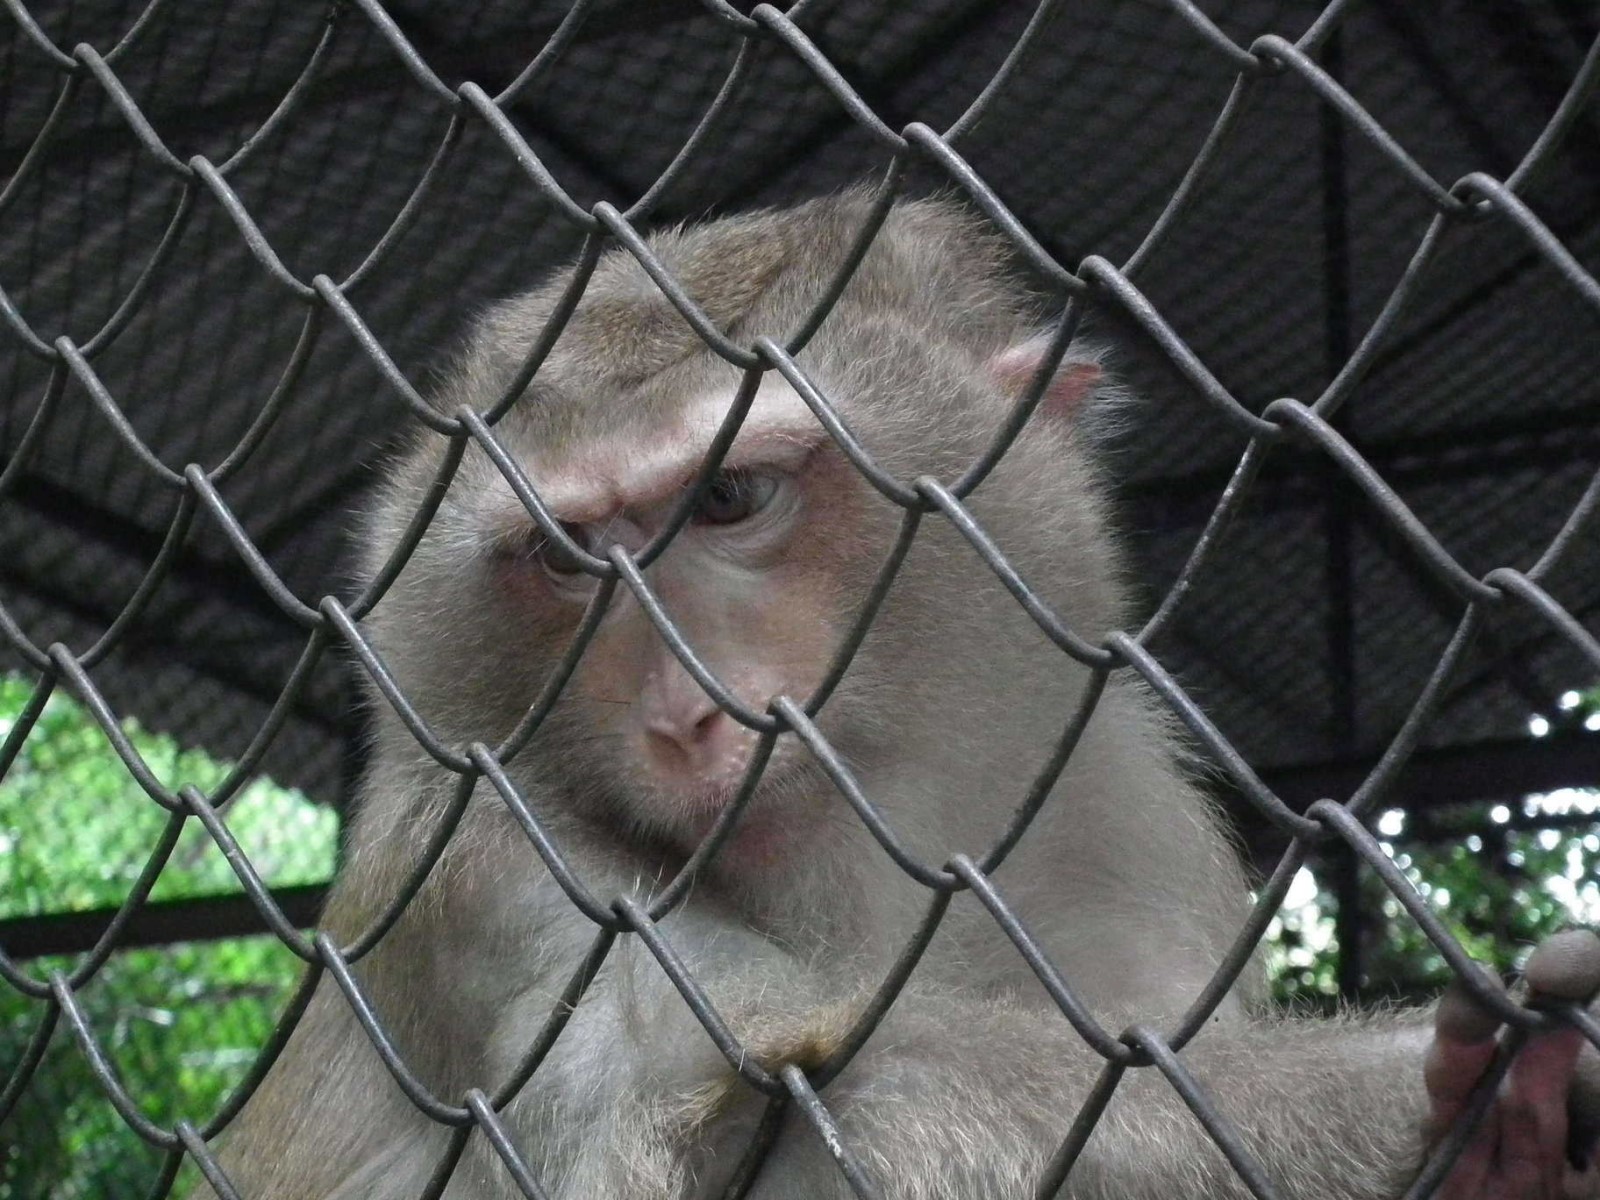 Monkey at Temple
, Monkey | Thailand | Cage | Brown